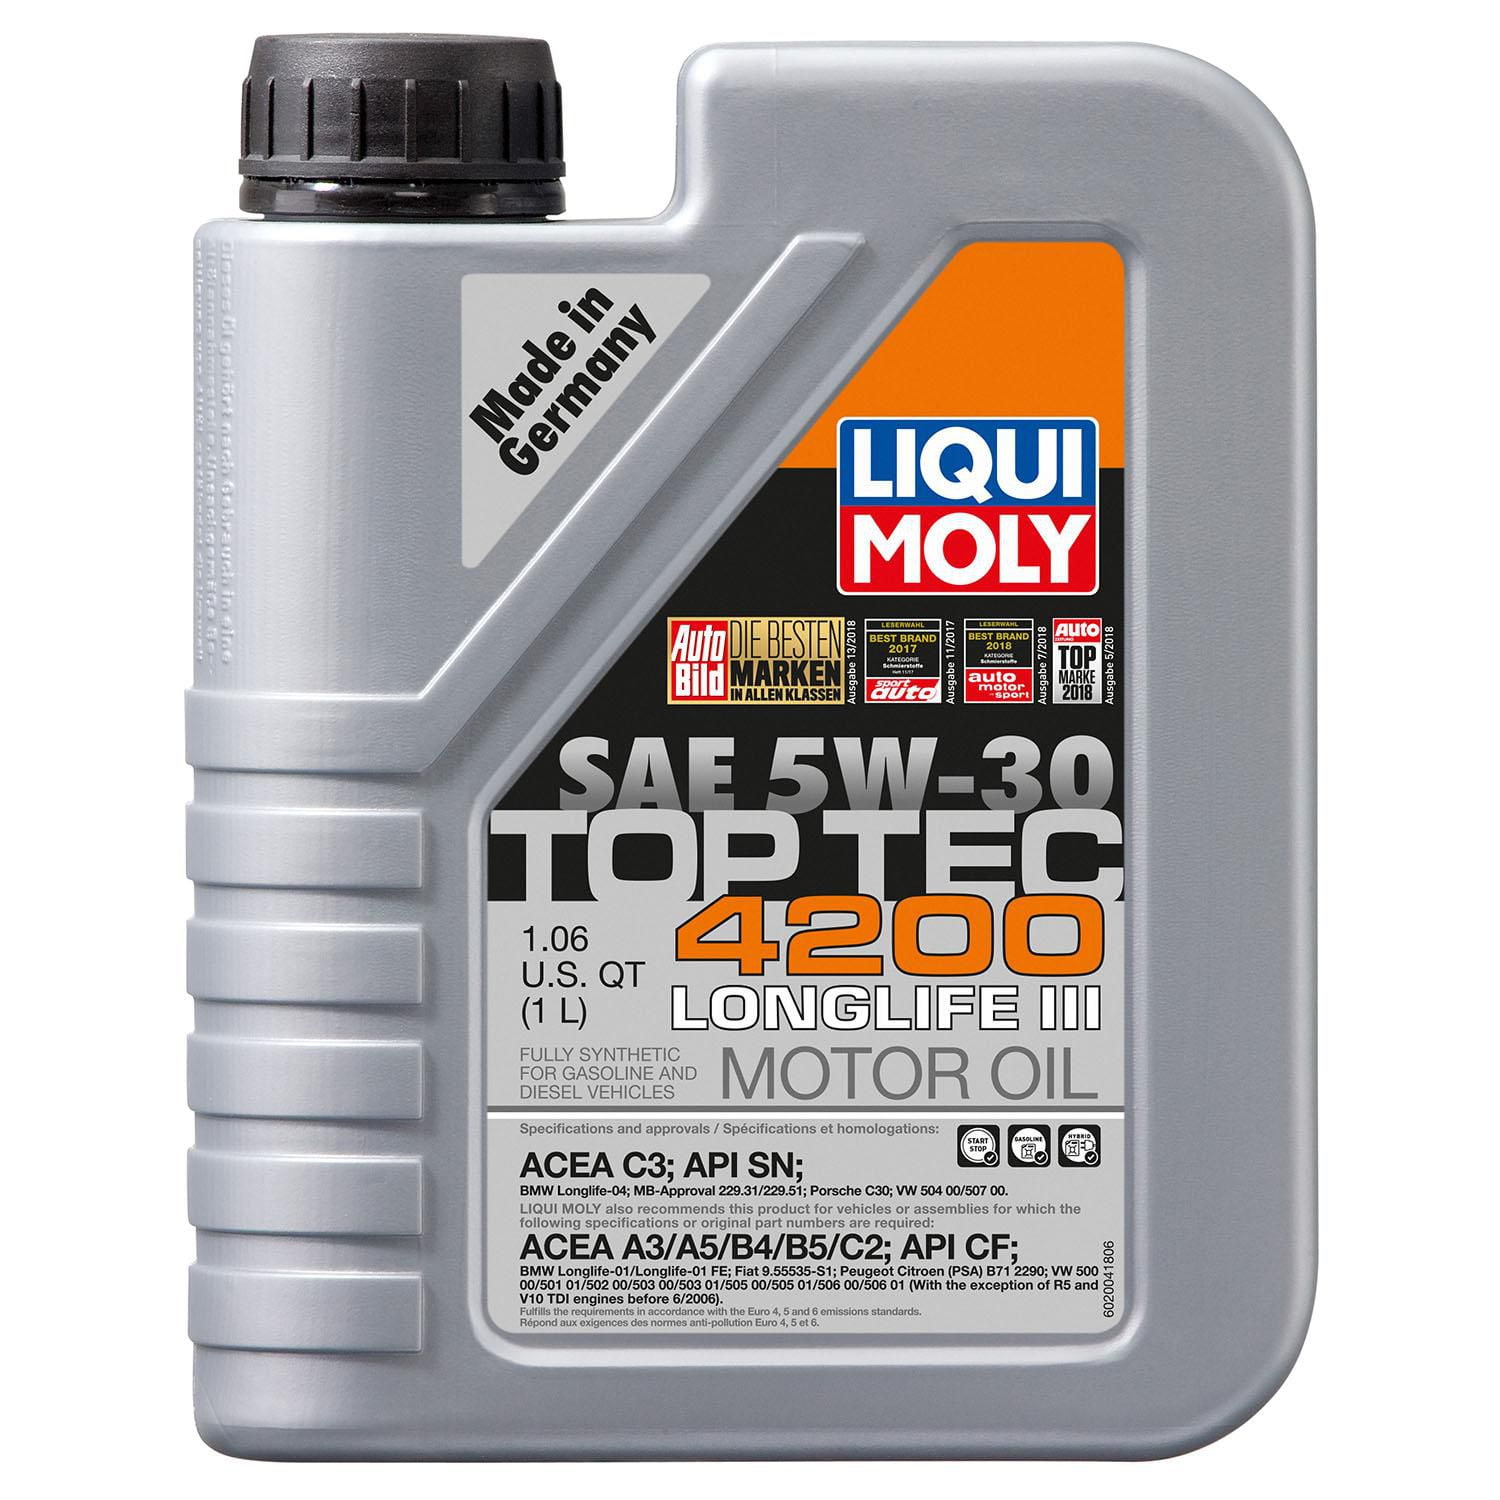 Liqui Moly 2004 1 L 4200 5W-30 Top Technology Synthetic Motor Oil 